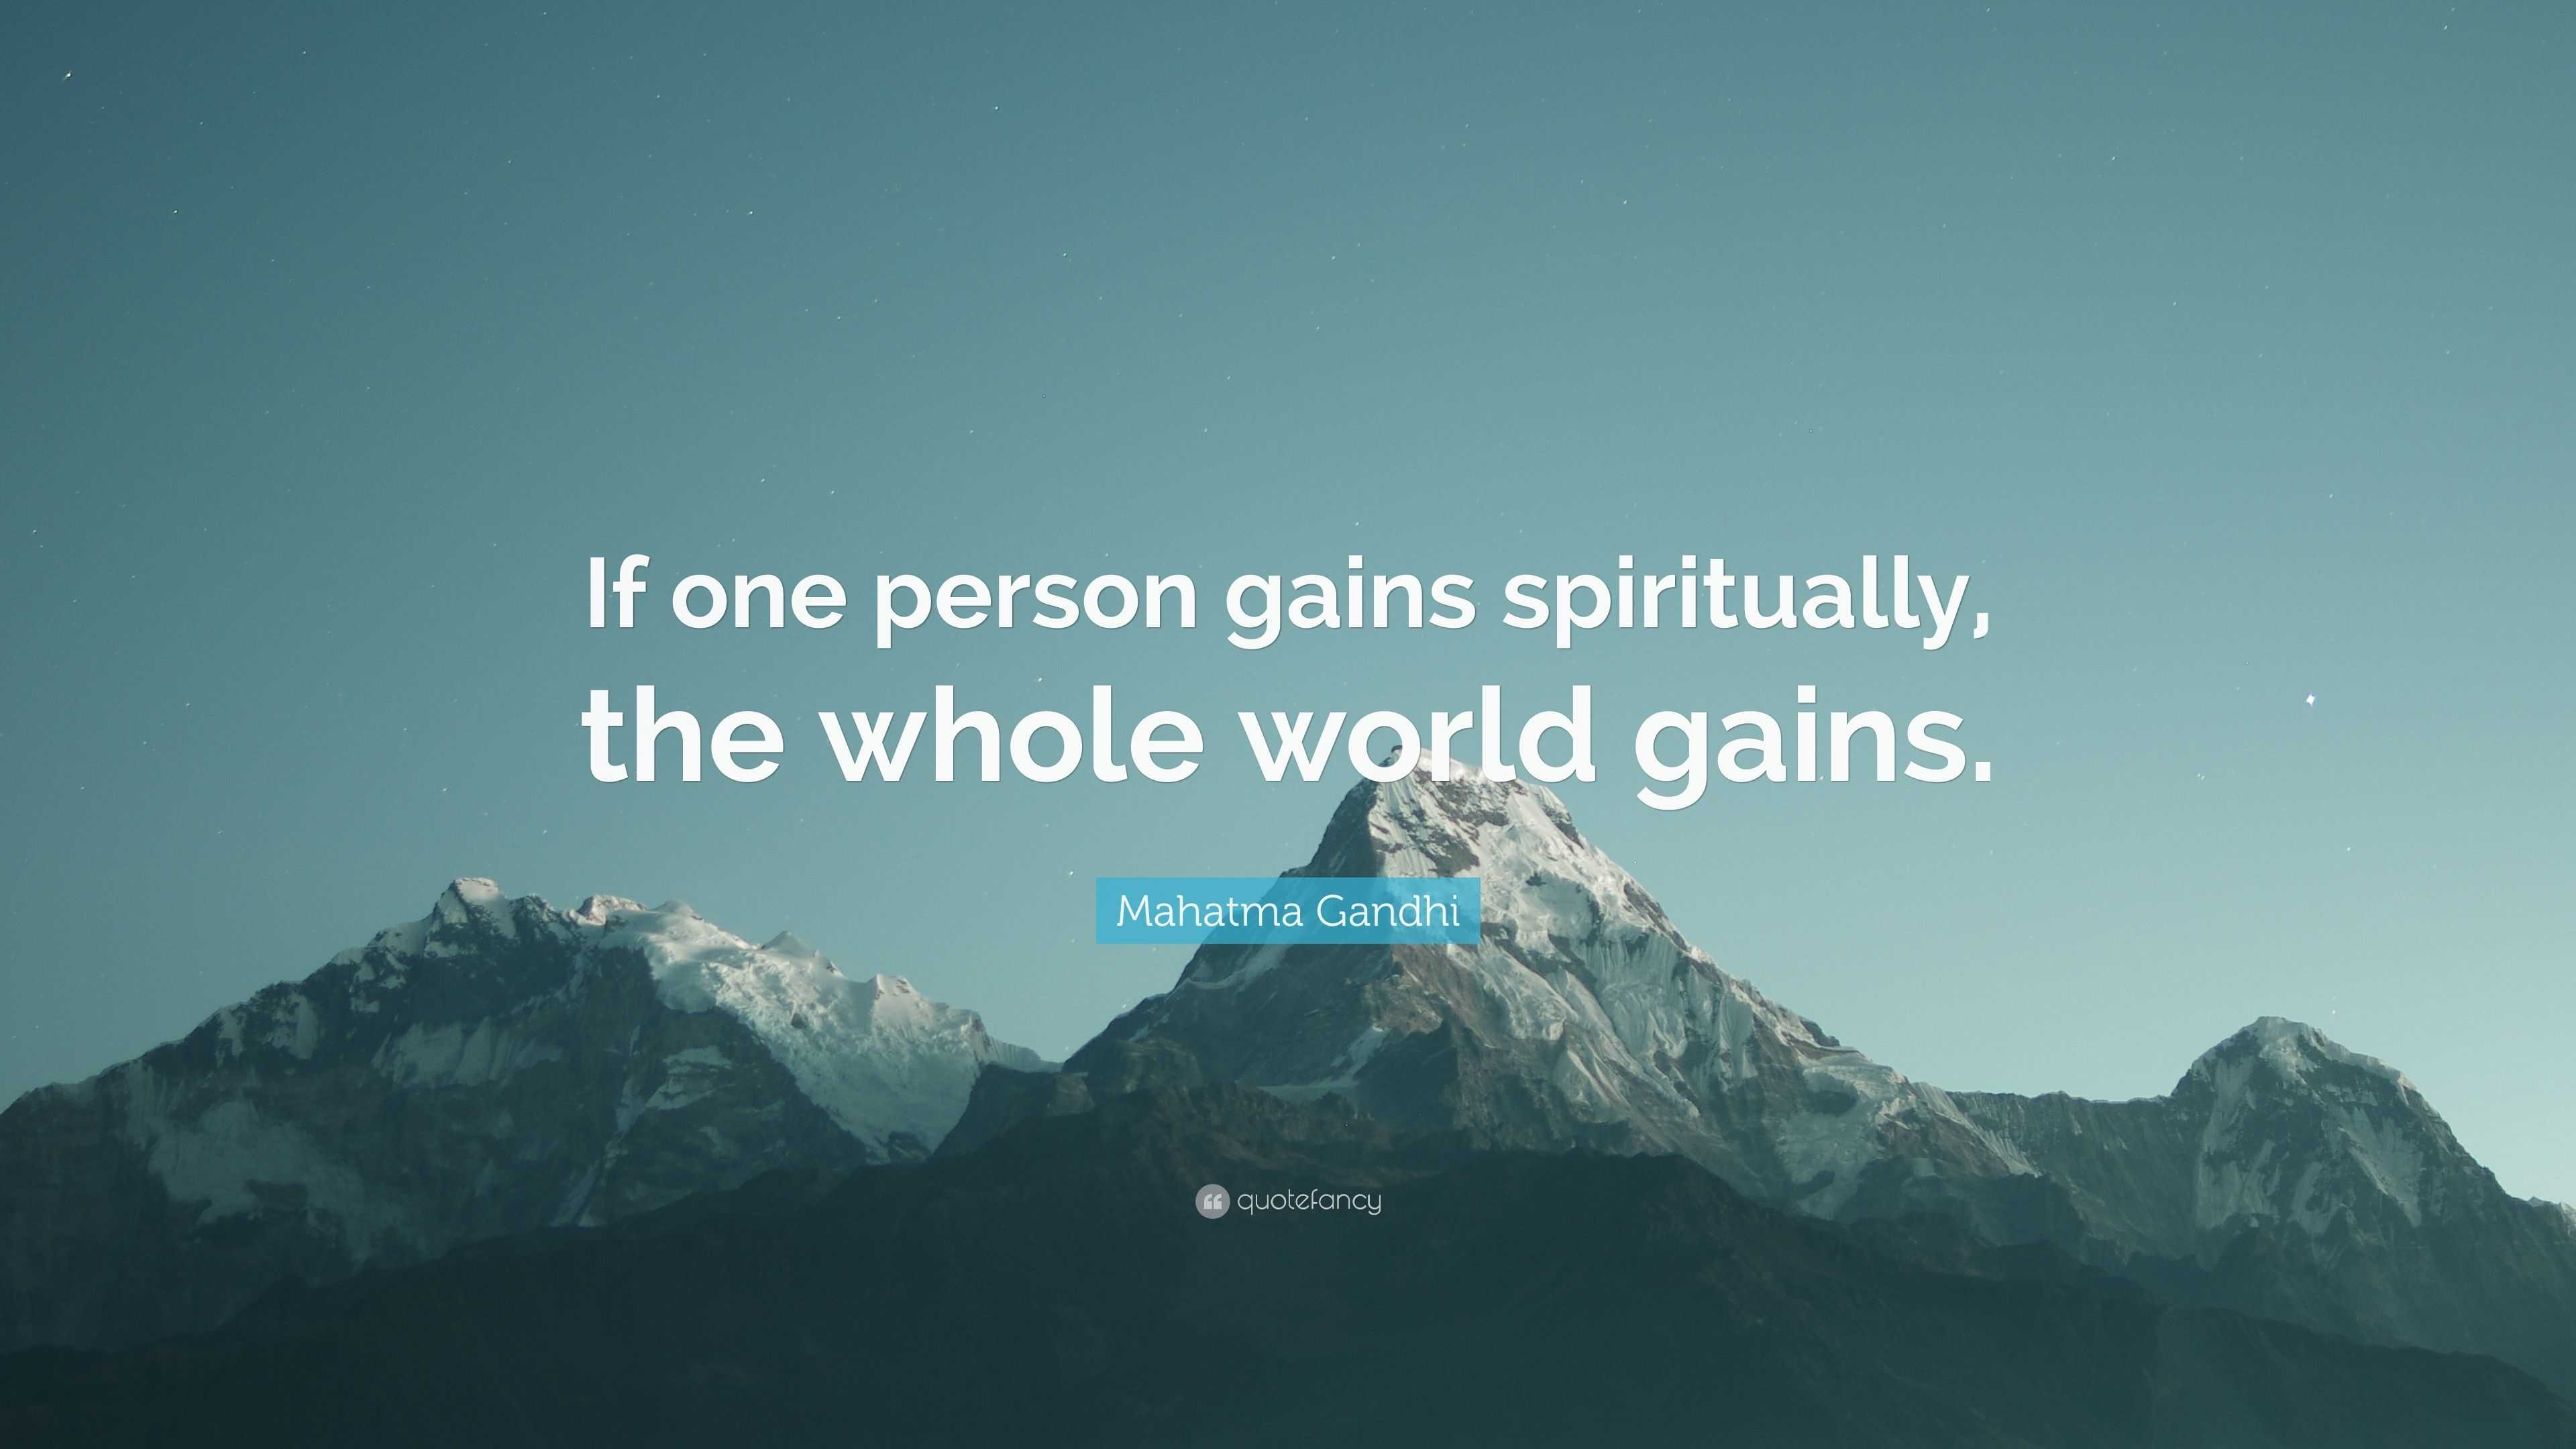 Mahatma Gandhi Quote: “If one person gains spiritually, the whole world  gains.”